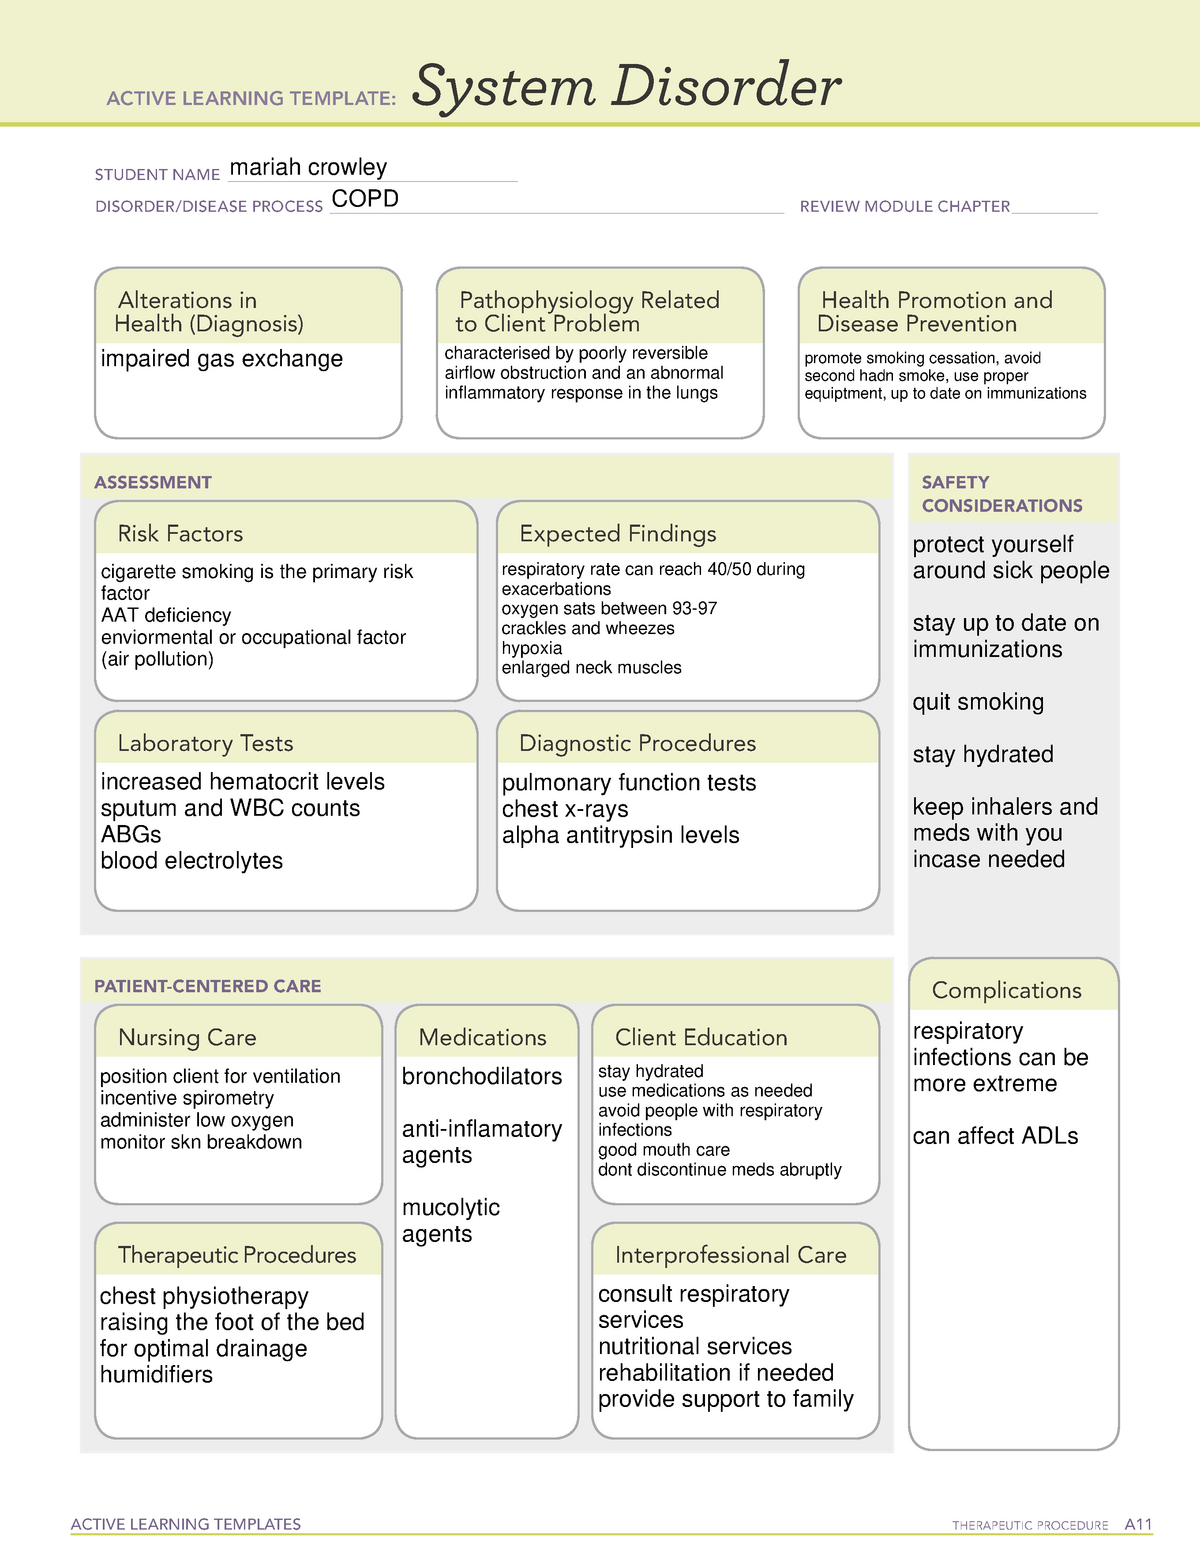 System disorder COPD ati template ACTIVE LEARNING TEMPLATES